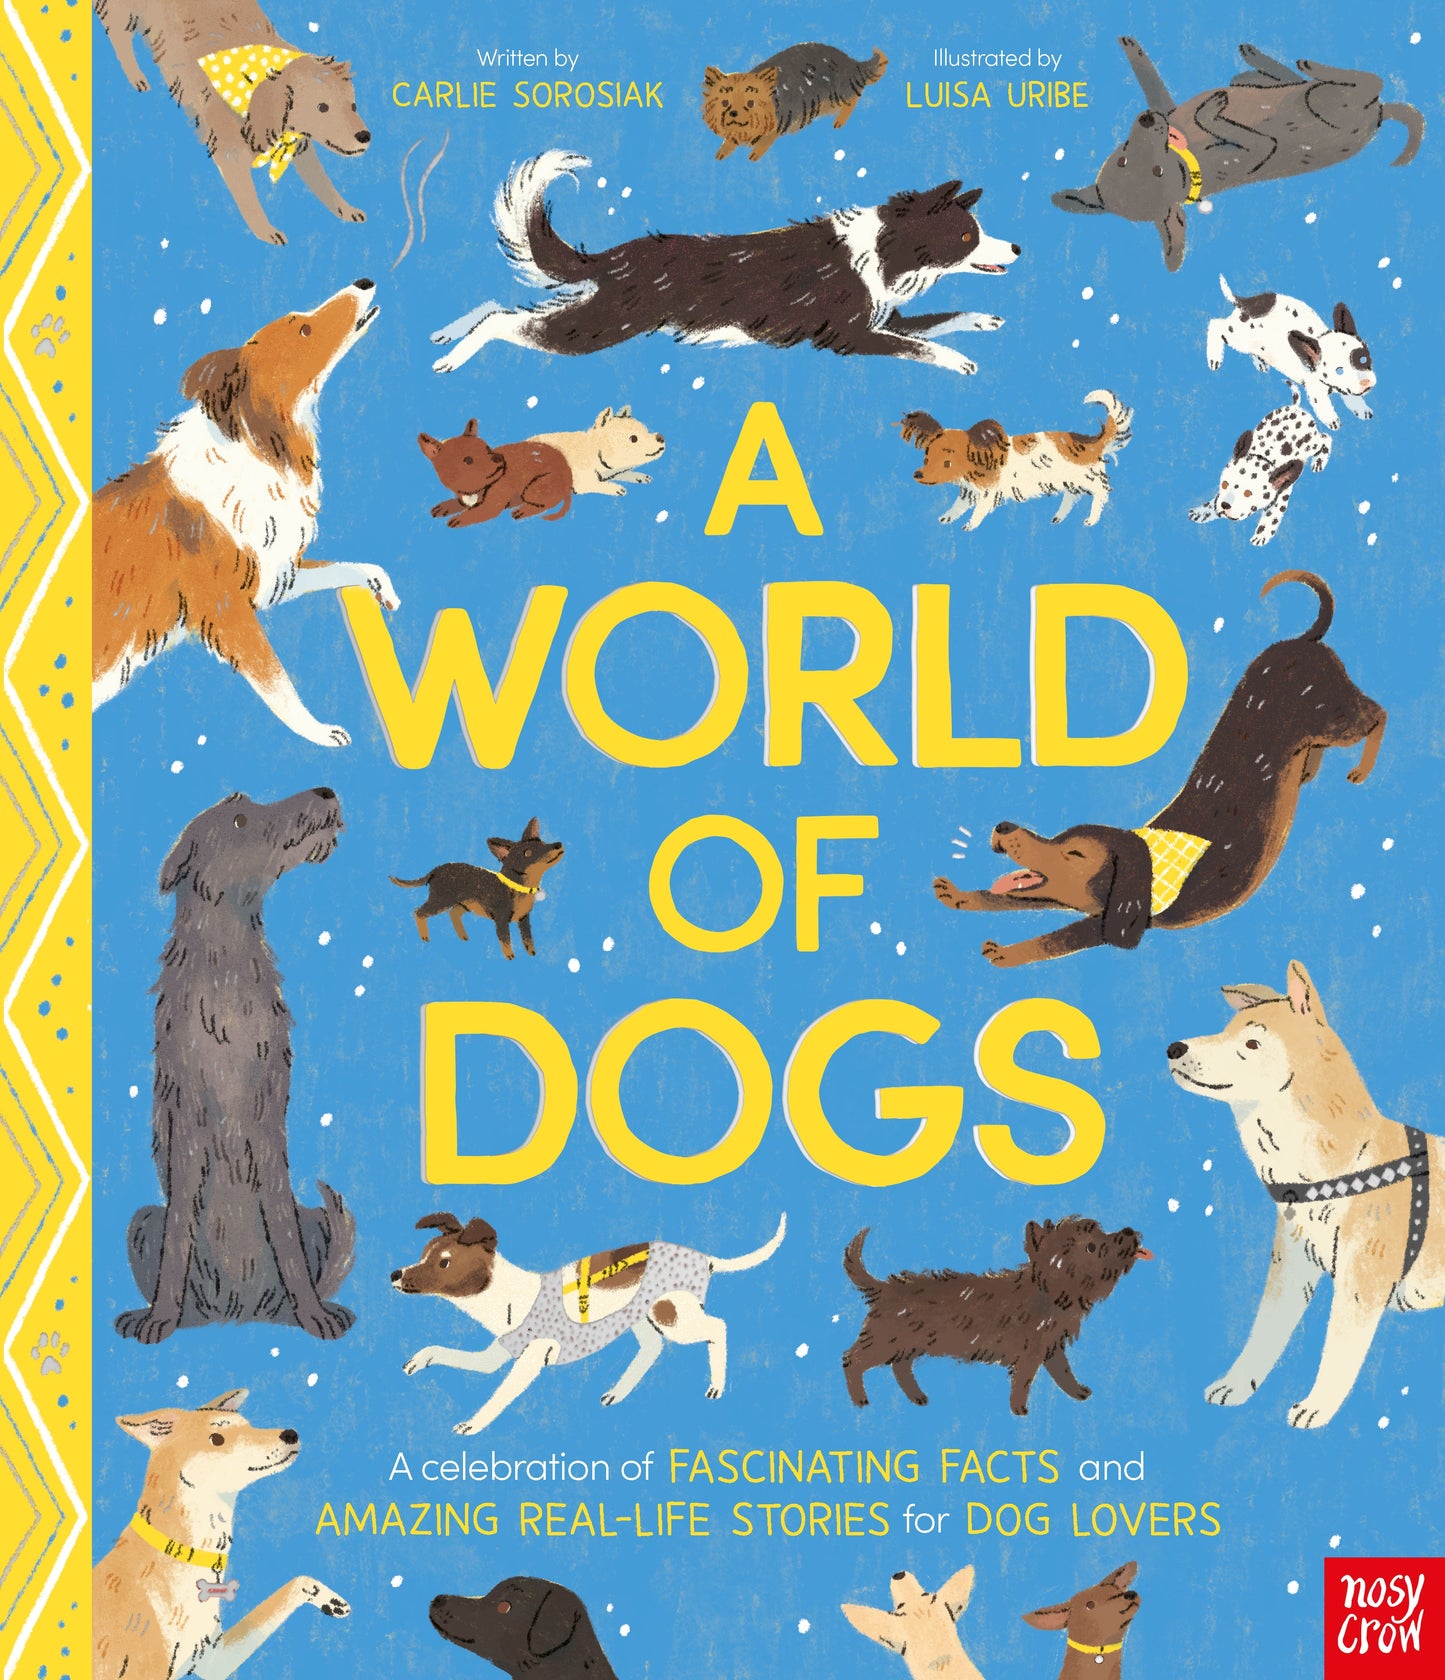 A world of dogs fascinating facts of dogs